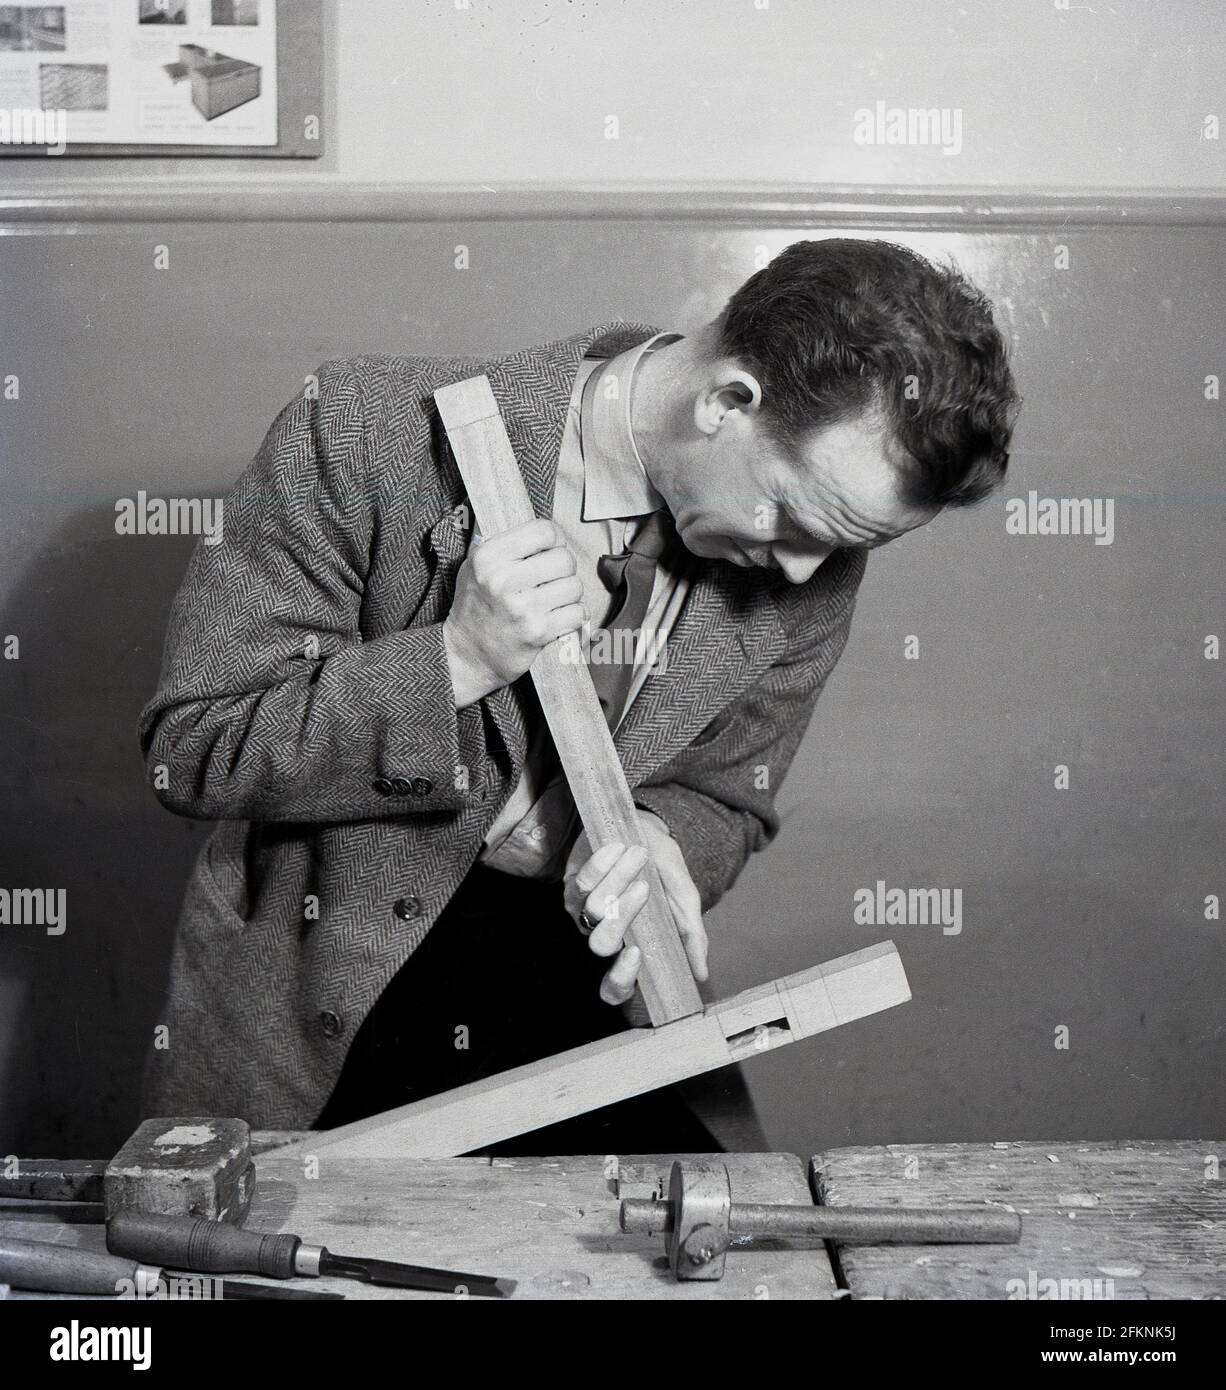 1950s, historical, woodworking, inside a classroom at a bench, a man in a jacket and tie fitting a wooden chair leg to the chair strut  or frame, England, UK. He is attending a an evening woodwork class. Growth and improvement in education became a key political goal in post-war Britain and a large number of adult education colleges were bullt and courses introduced to occupy and retrain ex-servicemen as well as those leaving secondary education. Stock Photo